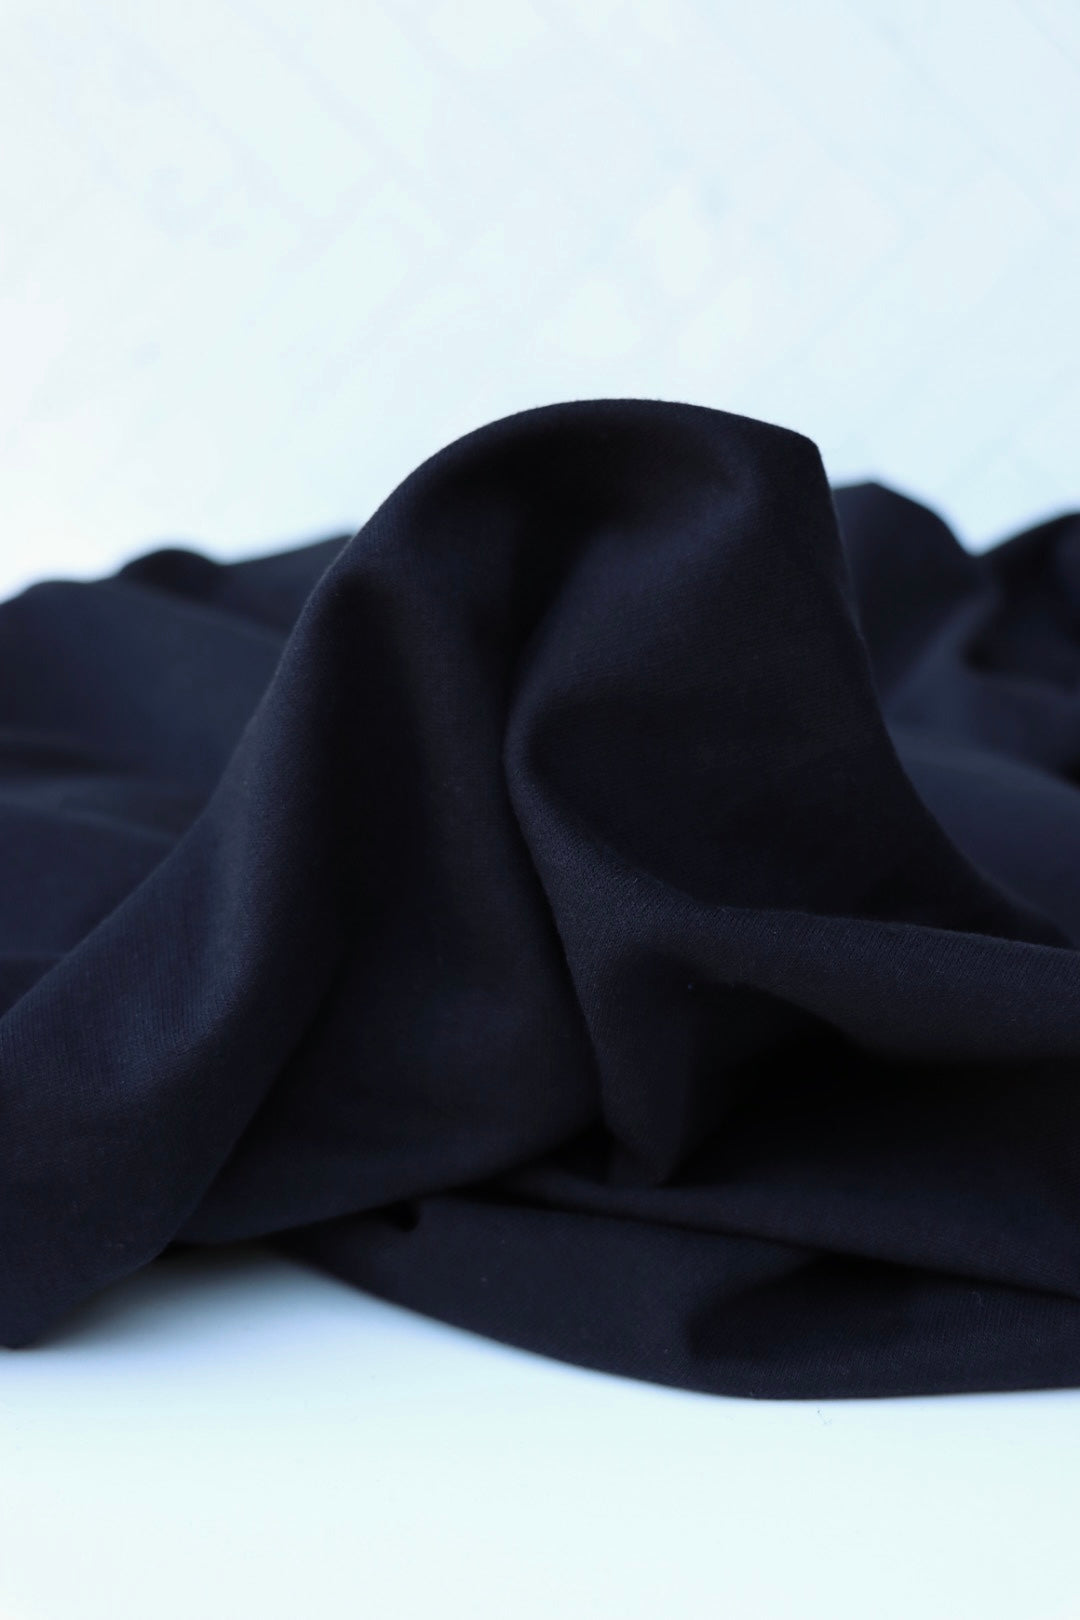 Polyester Wool Fabric Brushed Coating 59 inch Inches Wide Soft by The Yard Medium Heavy Weight (Black)